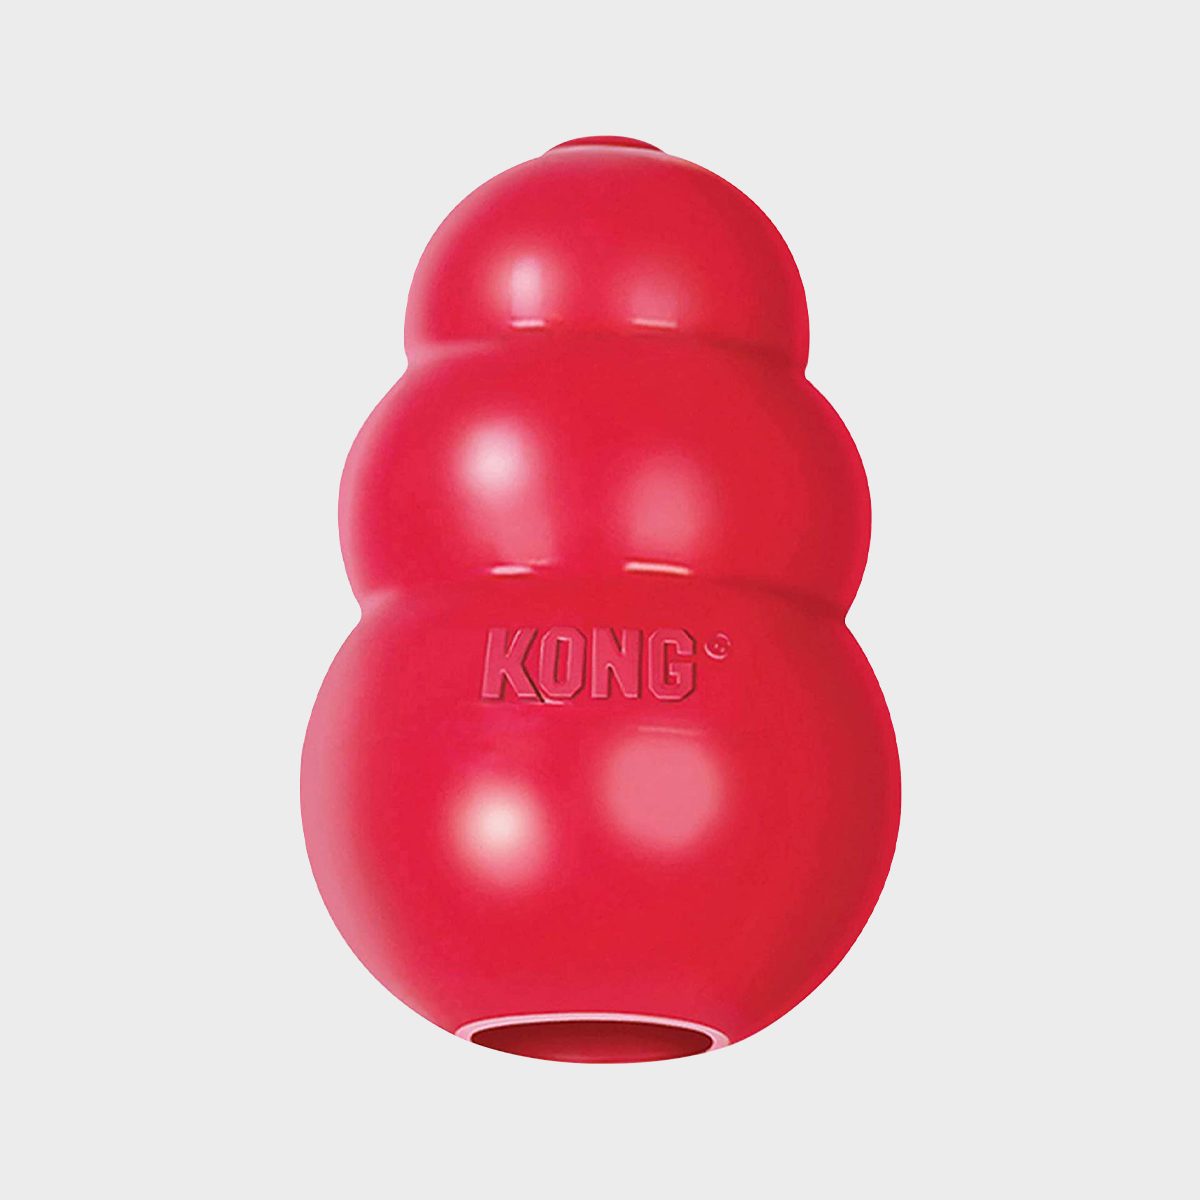 https://www.rd.com/wp-content/uploads/2022/06/KONG-Classic-Dog-Toy-Durable-Natural-Rubber-ecomm-amazon.com_.jpg?fit=700%2C700